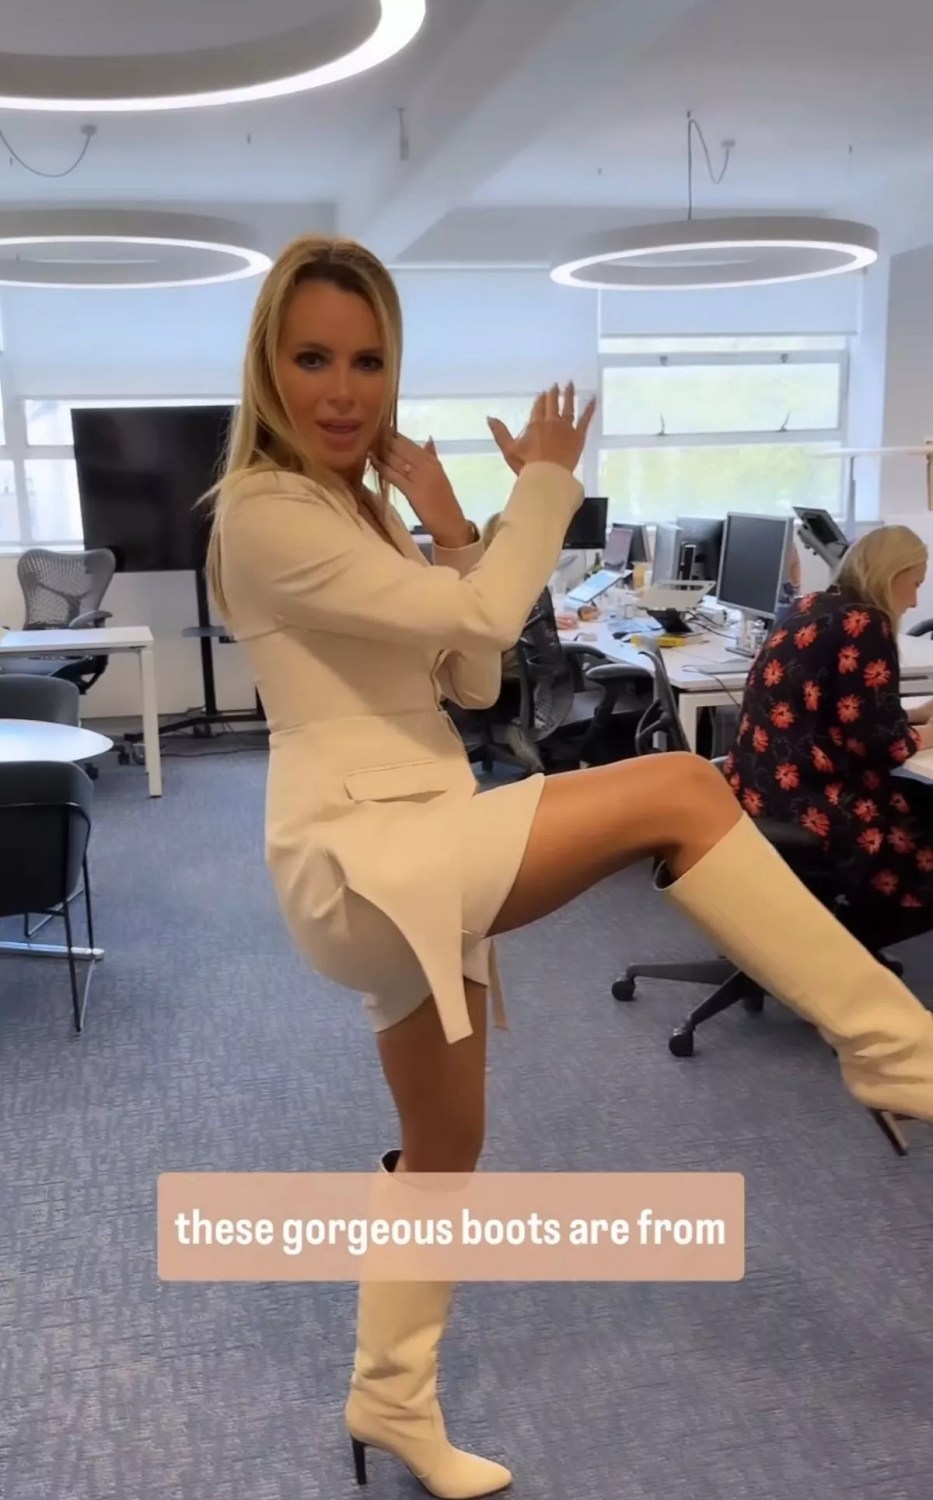 Amanda Holden May Face Disciplinary Action For Going Braless In A Plunging Dress